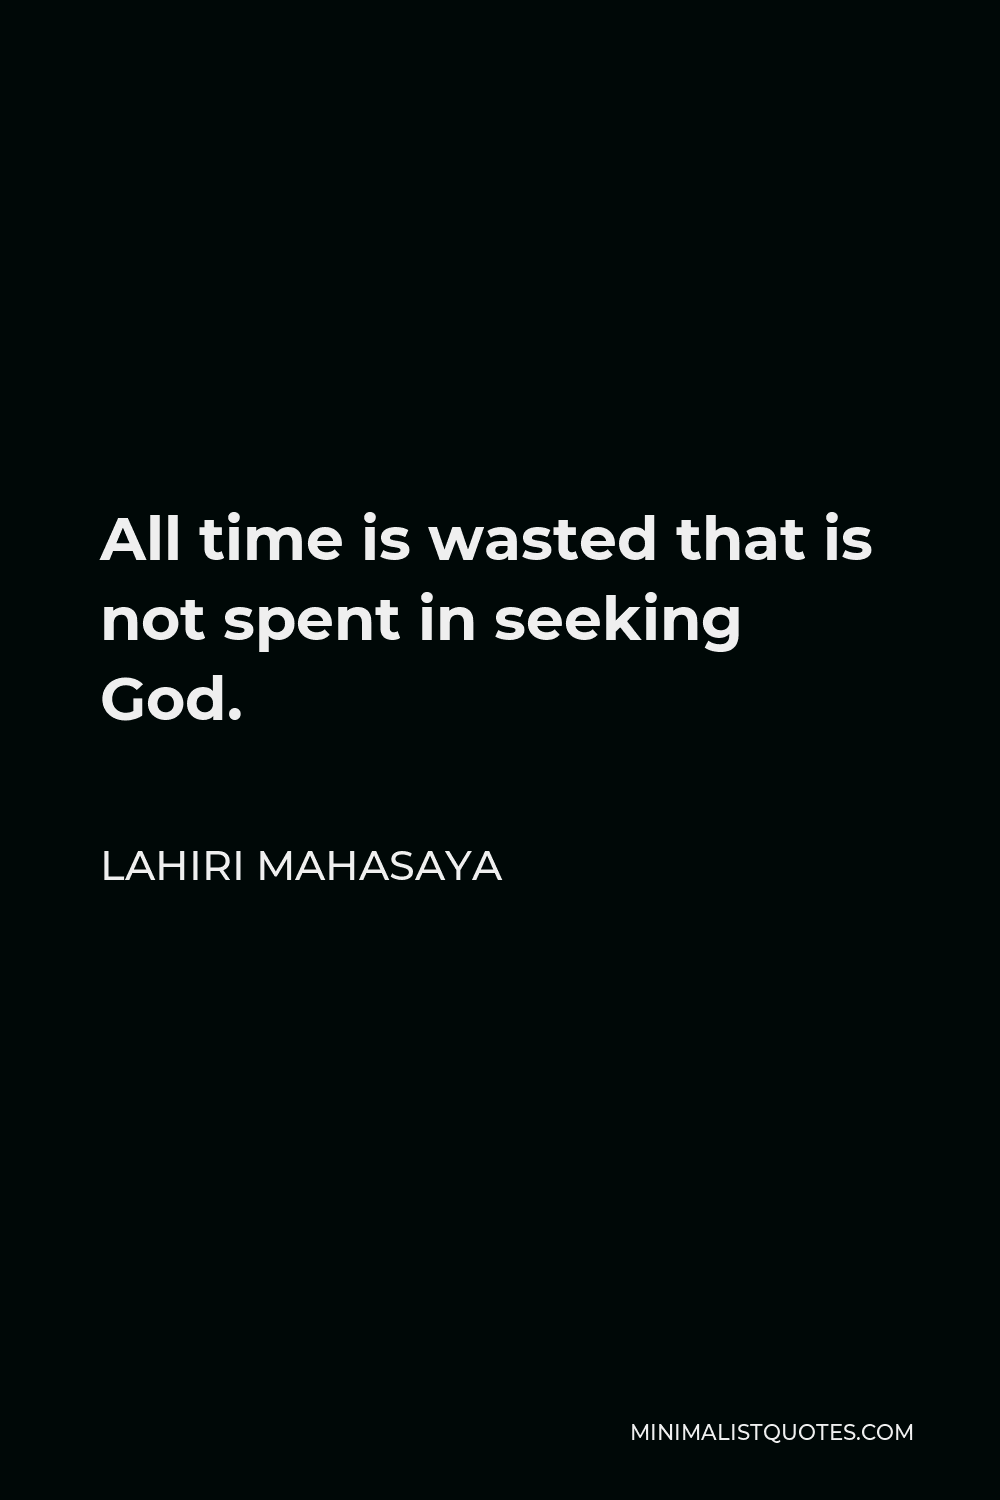 Lahiri Mahasaya Quote - All time is wasted that is not spent in seeking God.